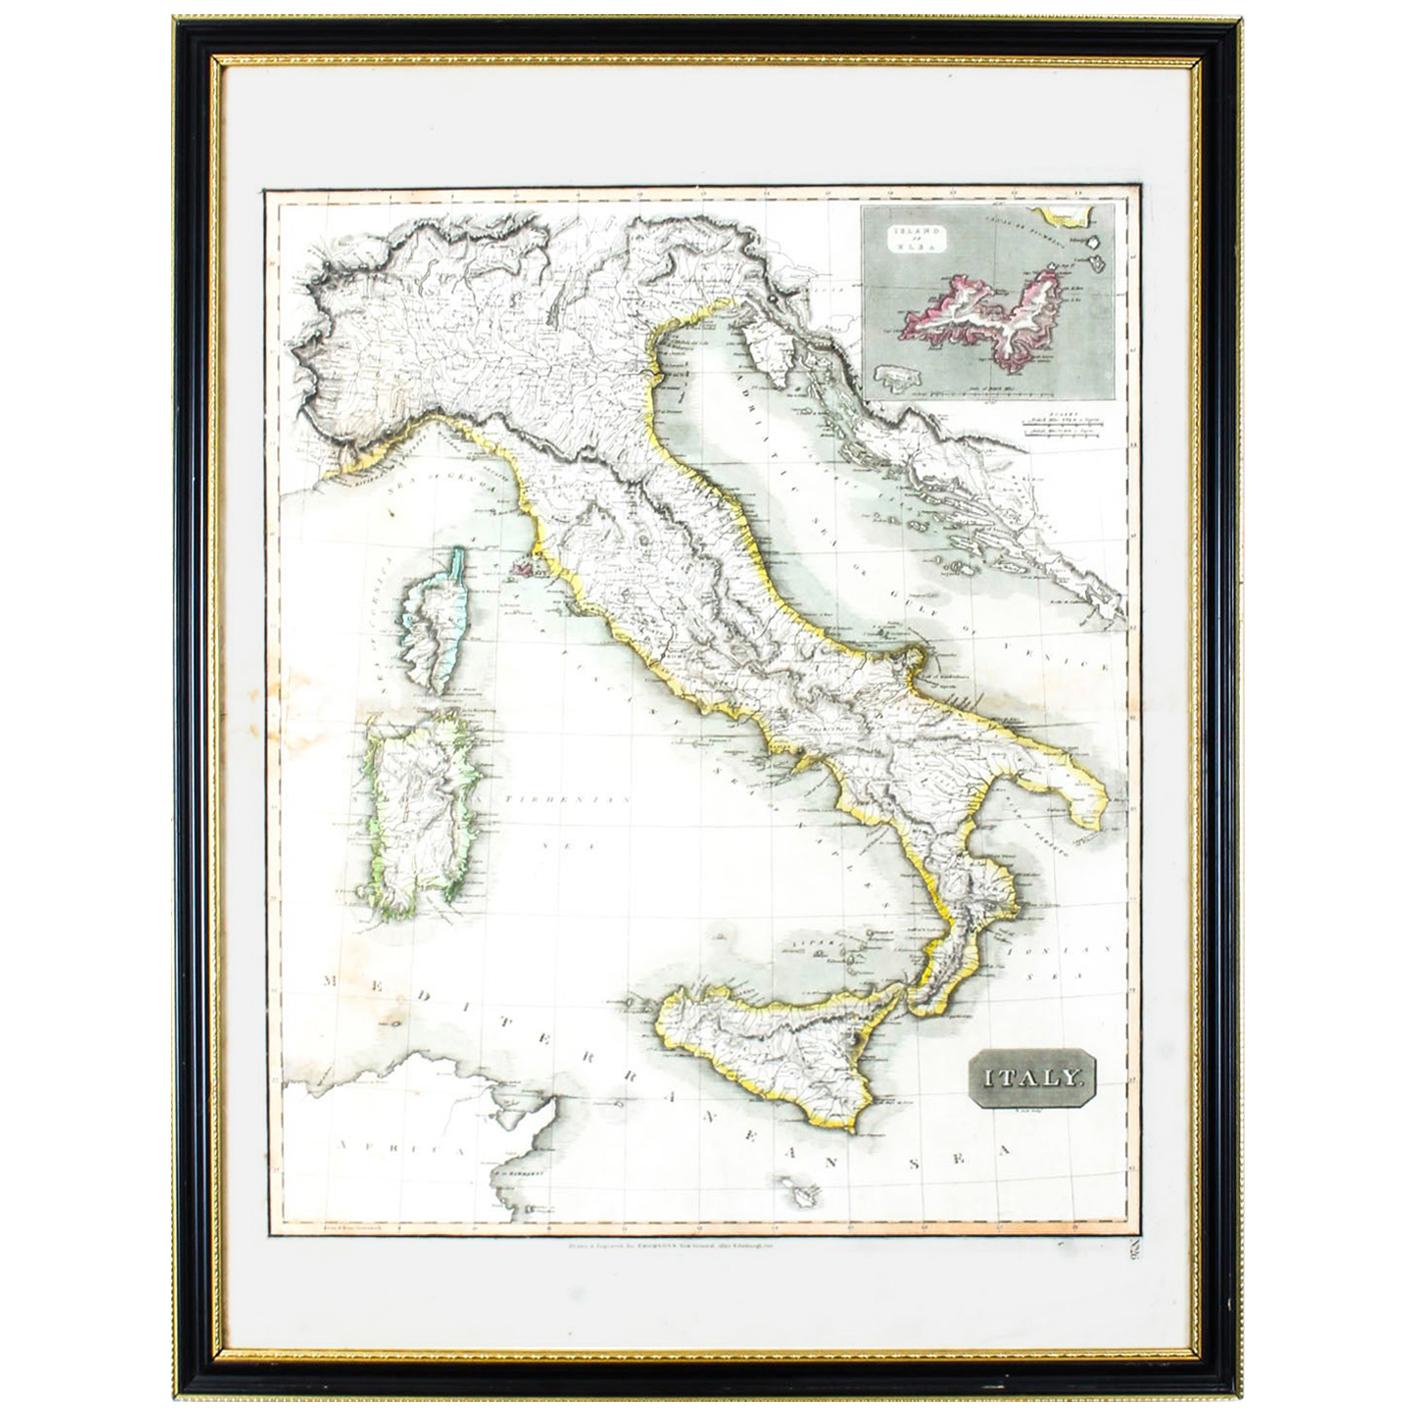 Antique Map of Italy Drawn & Engraved by R. Scott for Thomsons, Edinburgh 1814